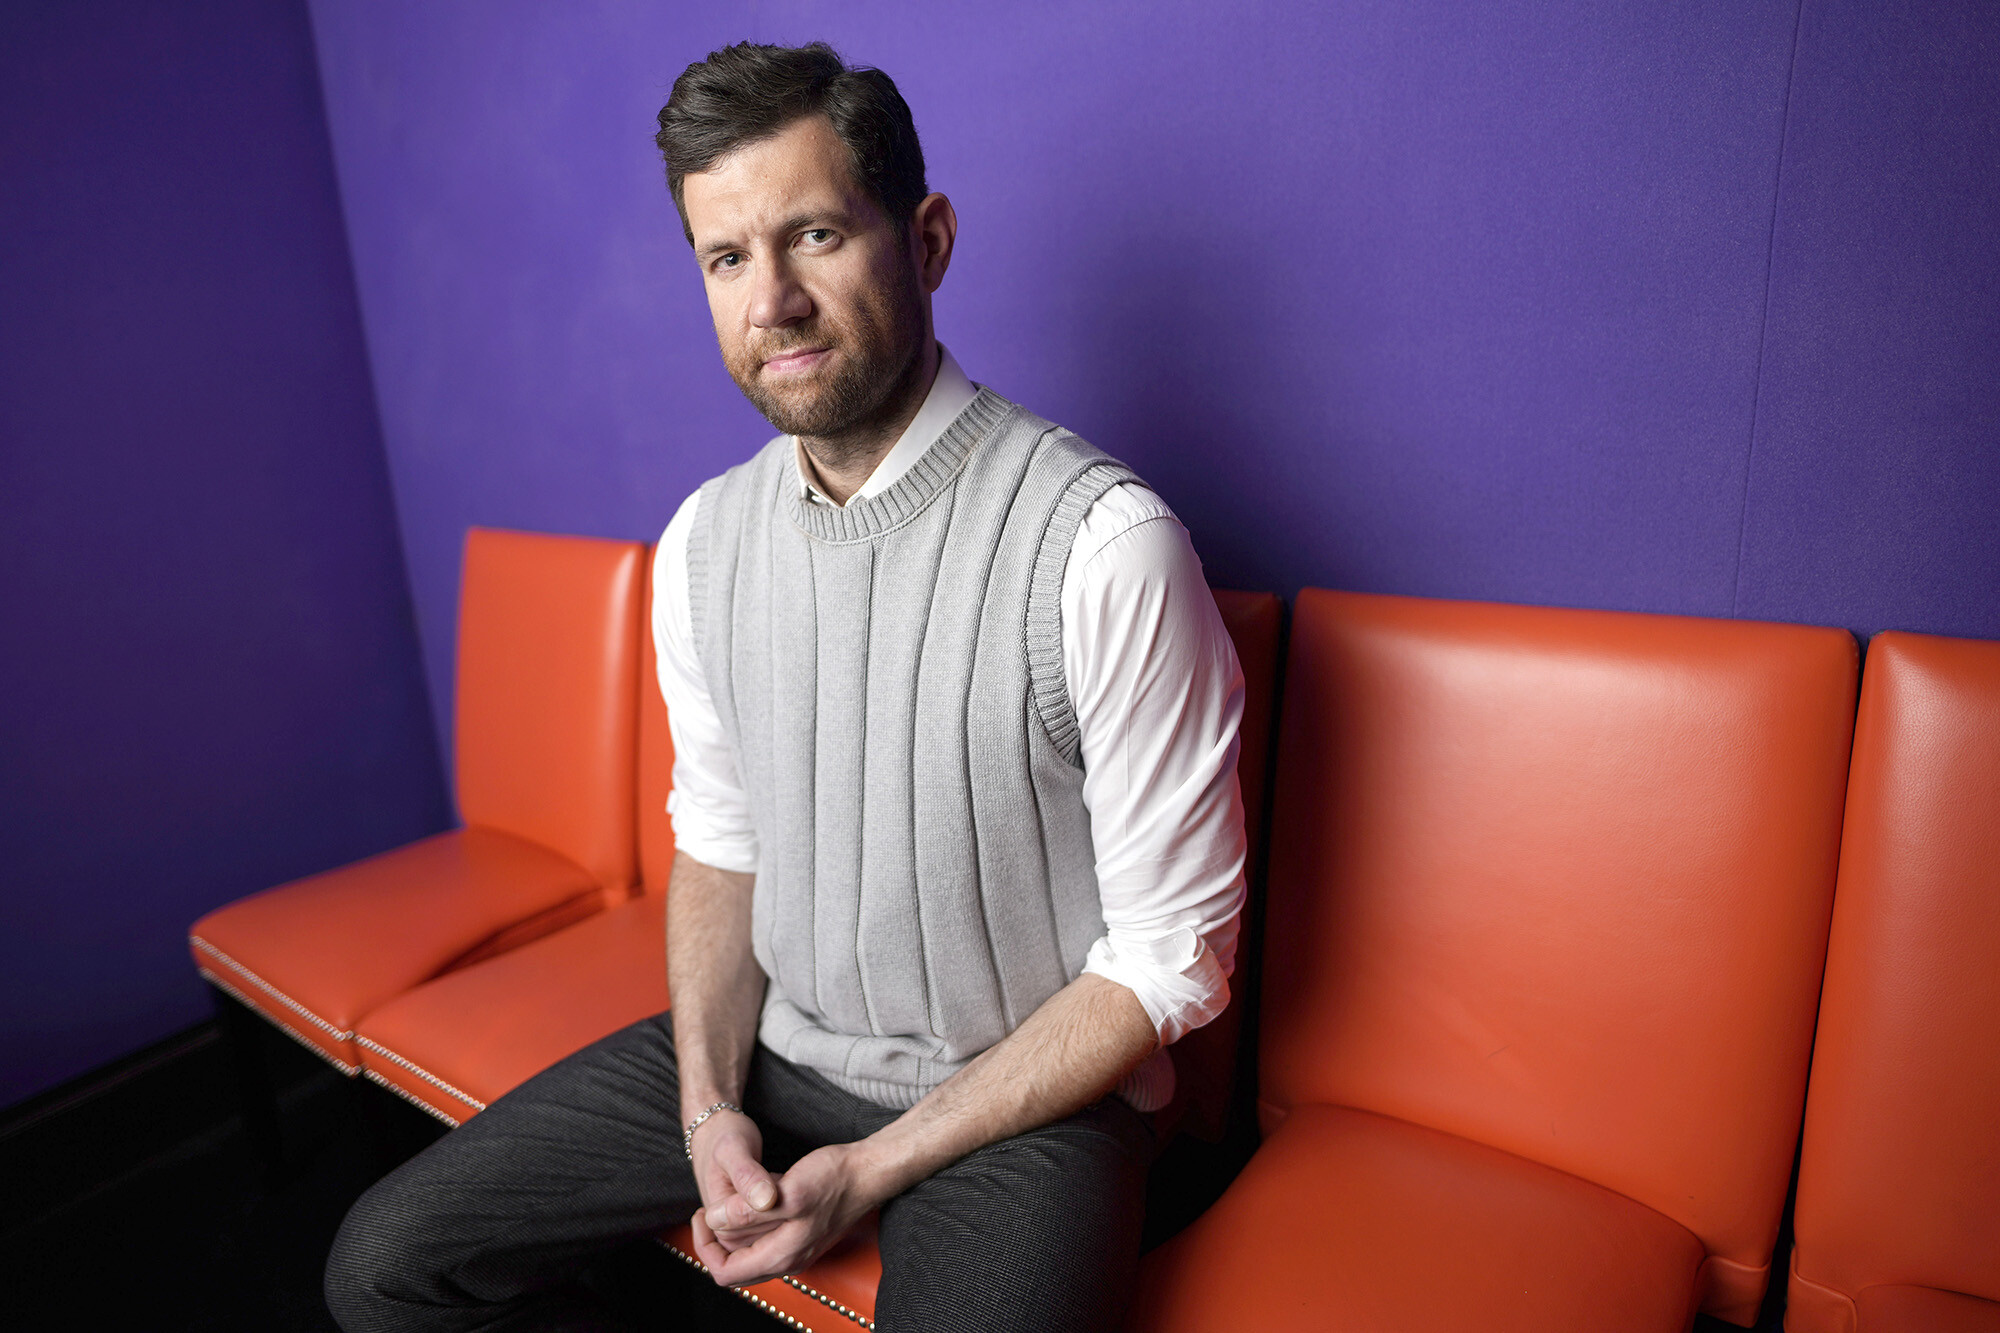 <i>Charles Sykes/Invision/AP</i><br/>Billy Eichner poses for a portrait at the Crosby Street Hotel to promote his film 